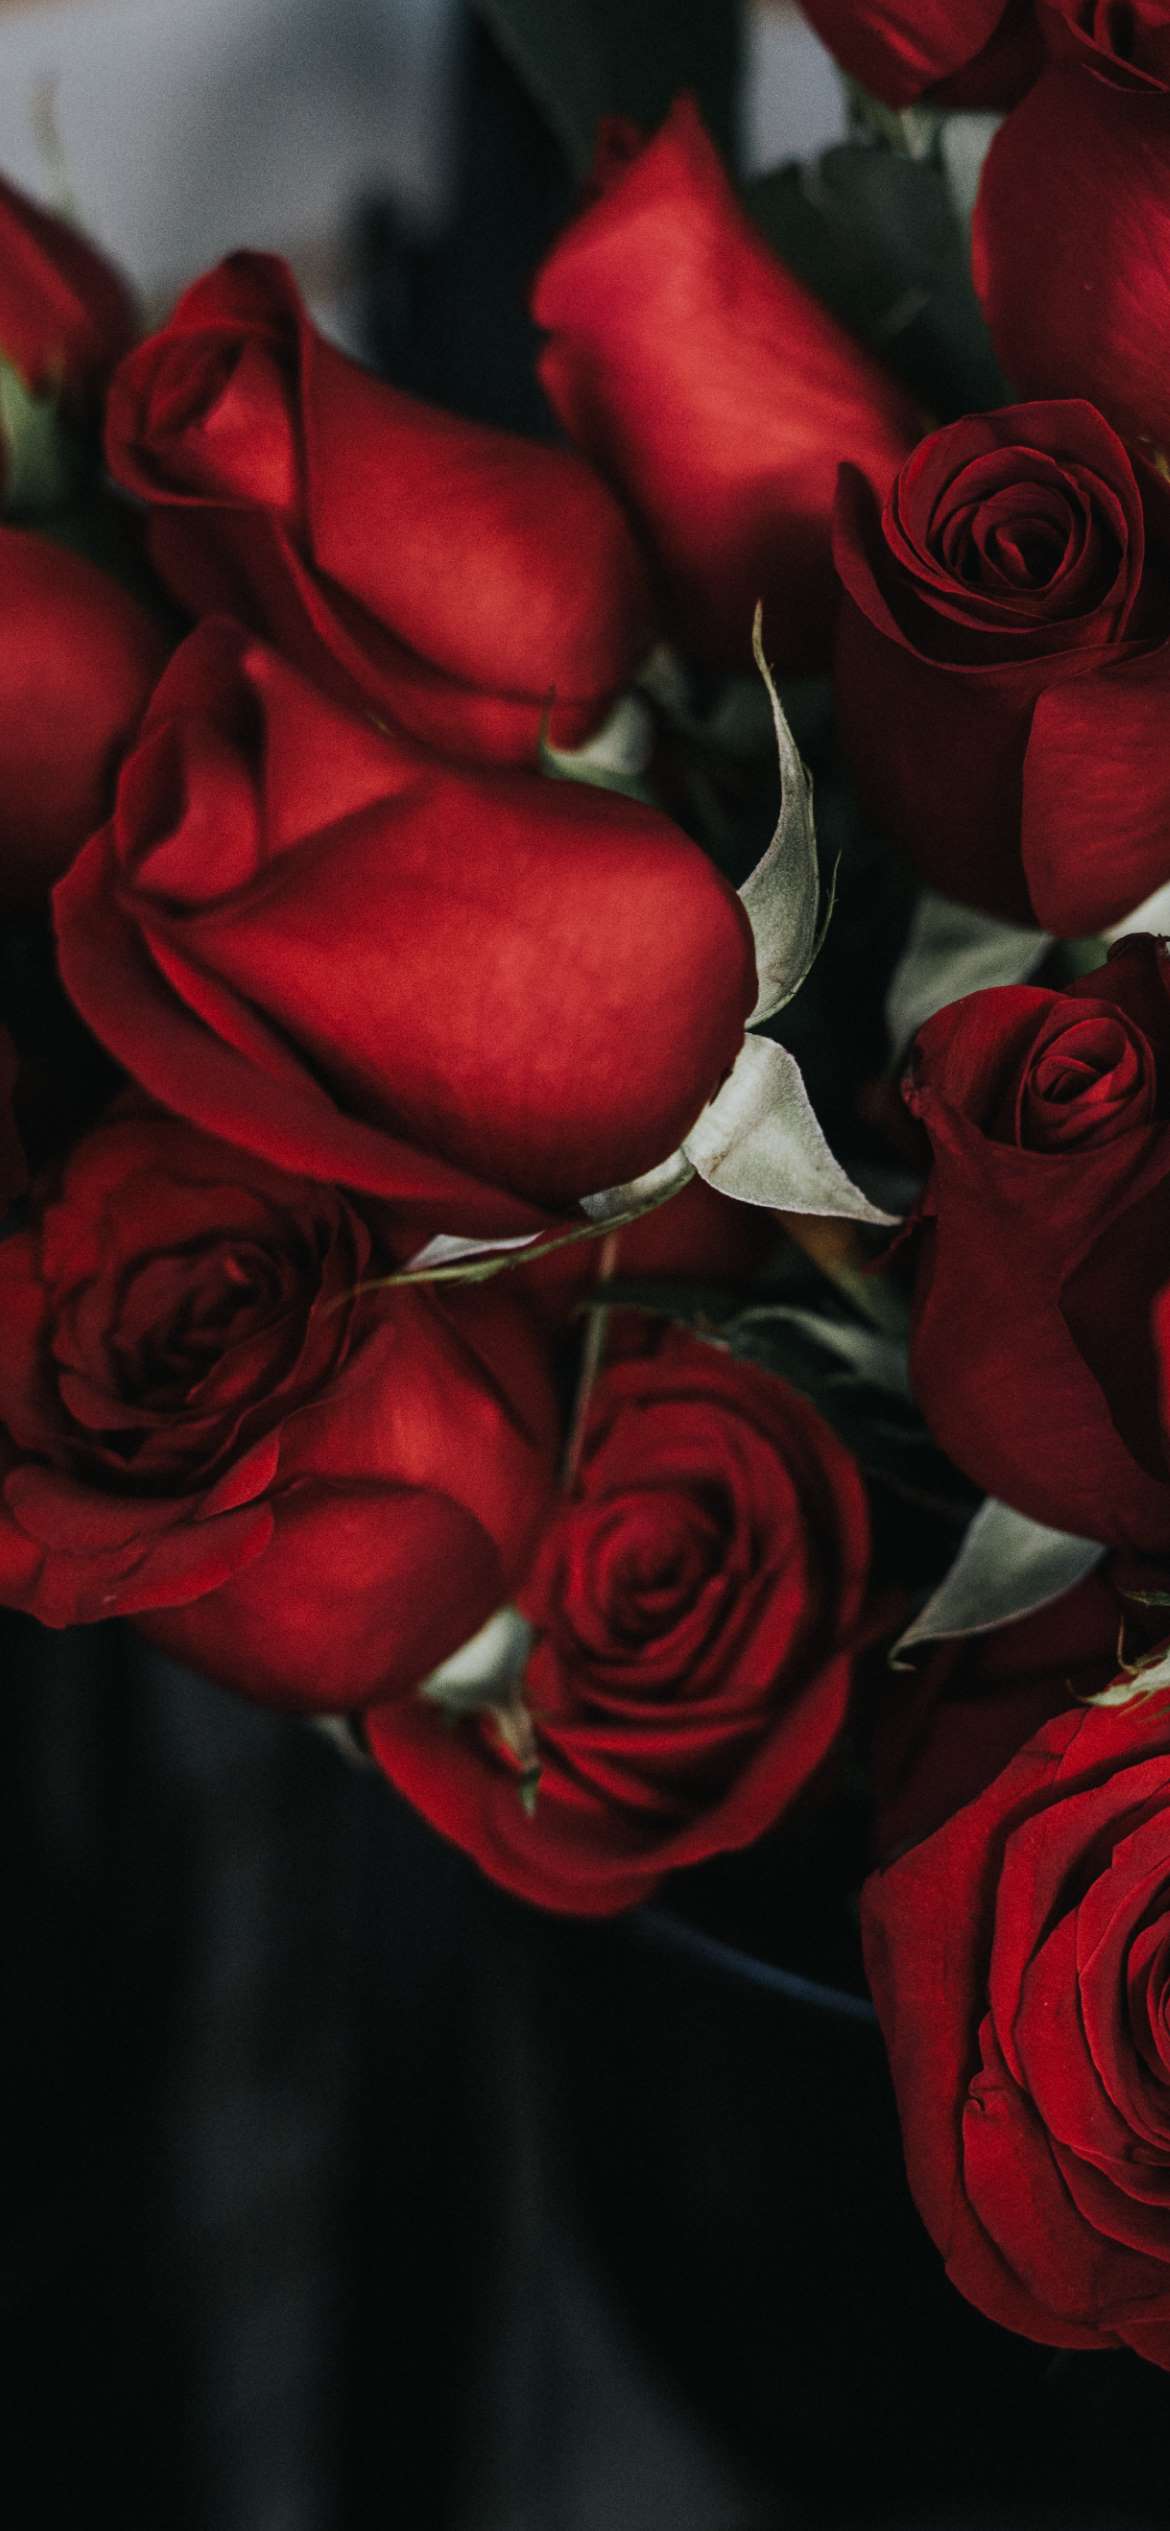 Valentines Day Wallpaper Pink and Red Roses  The Dreamiest iPhone  Wallpapers For Valentines Day That Fit Any Aesthetic  POPSUGAR Tech Photo  26